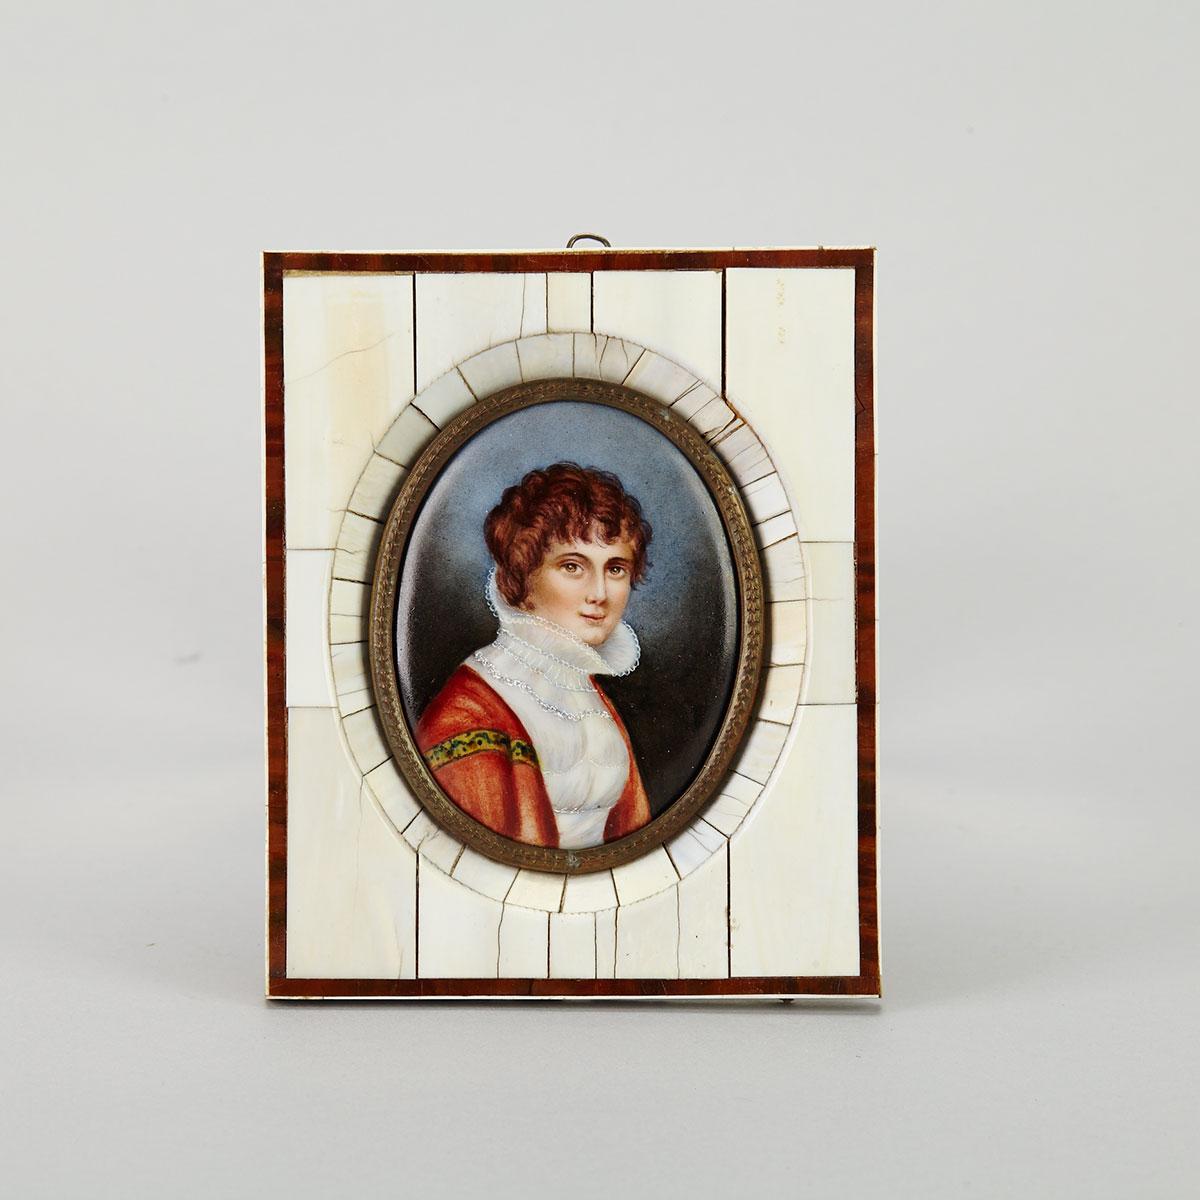 Finnish School Portrait Miniature on Porcelain of a Young Woman, 19th century